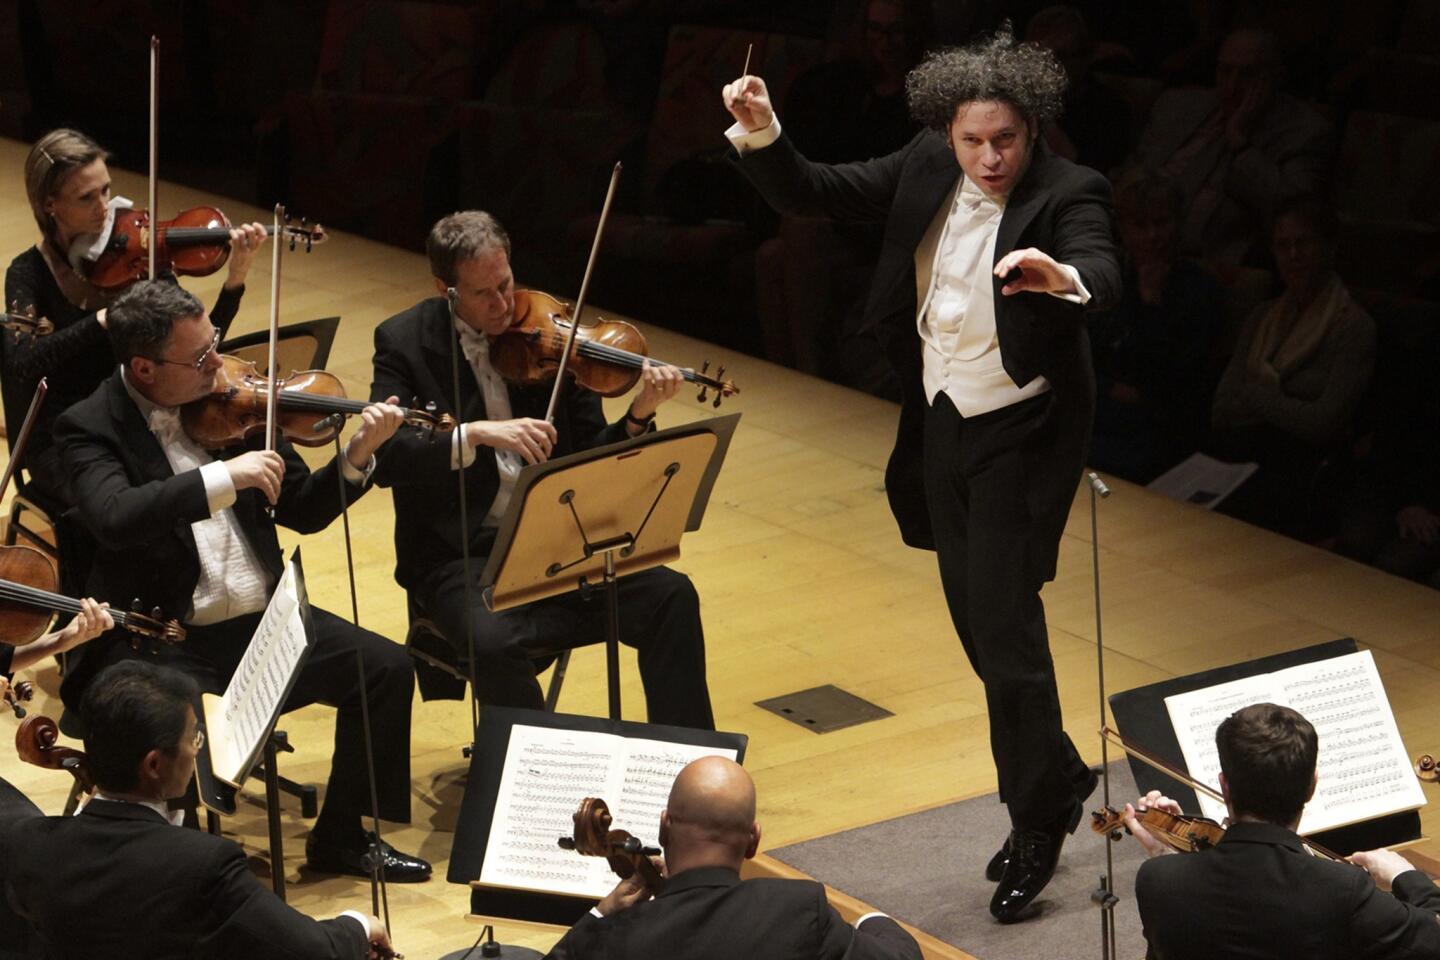 Arts and culture in pictures by The Times | Gustavo Dudamel and the L.A. Phil